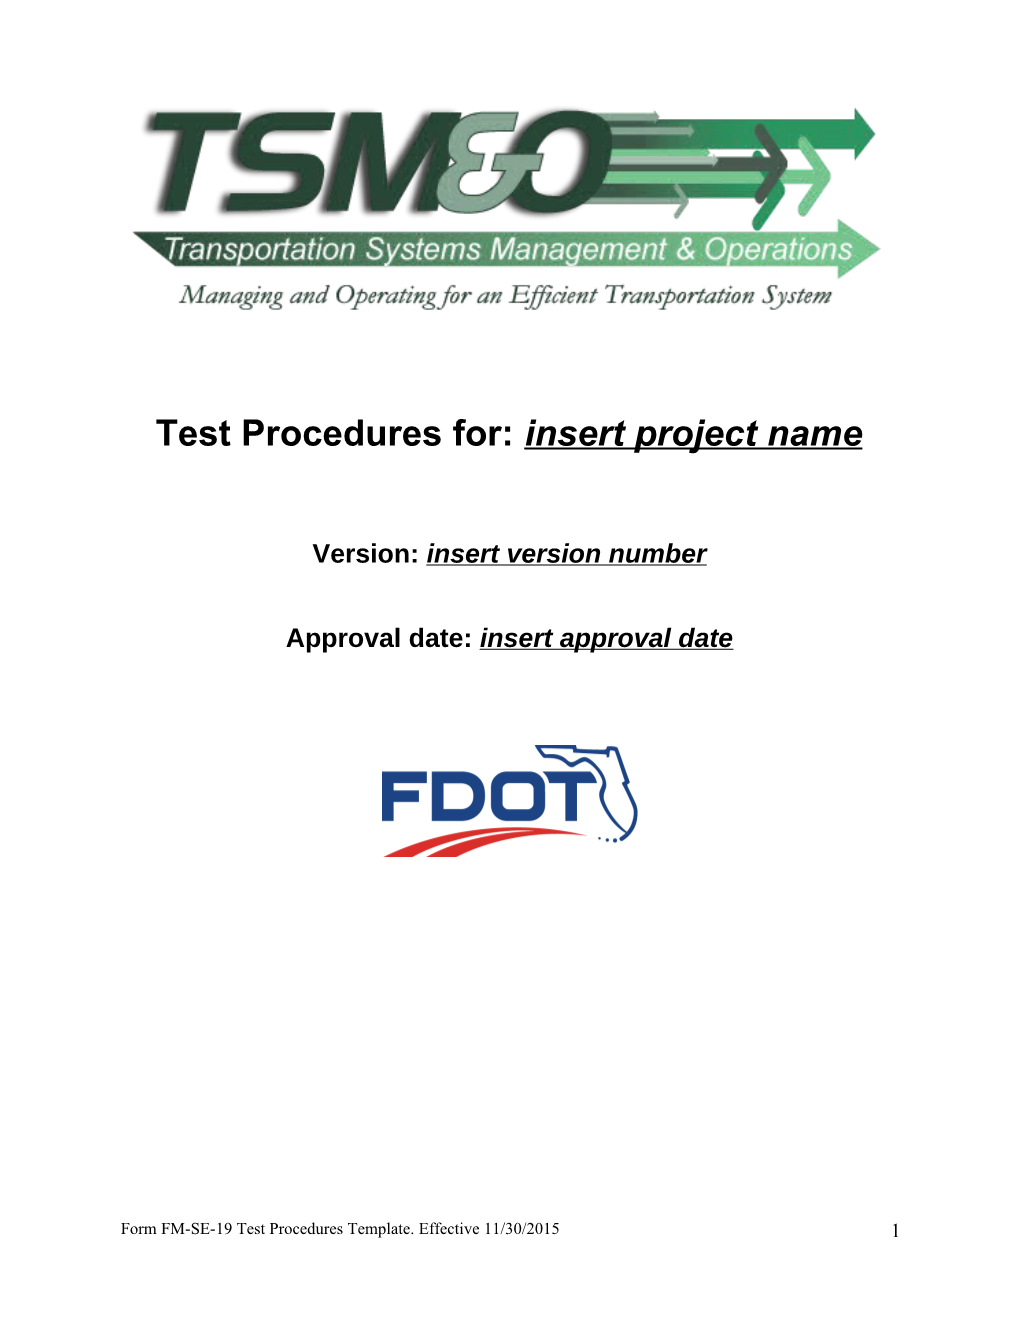 Test Procedures For:Insert Project Name